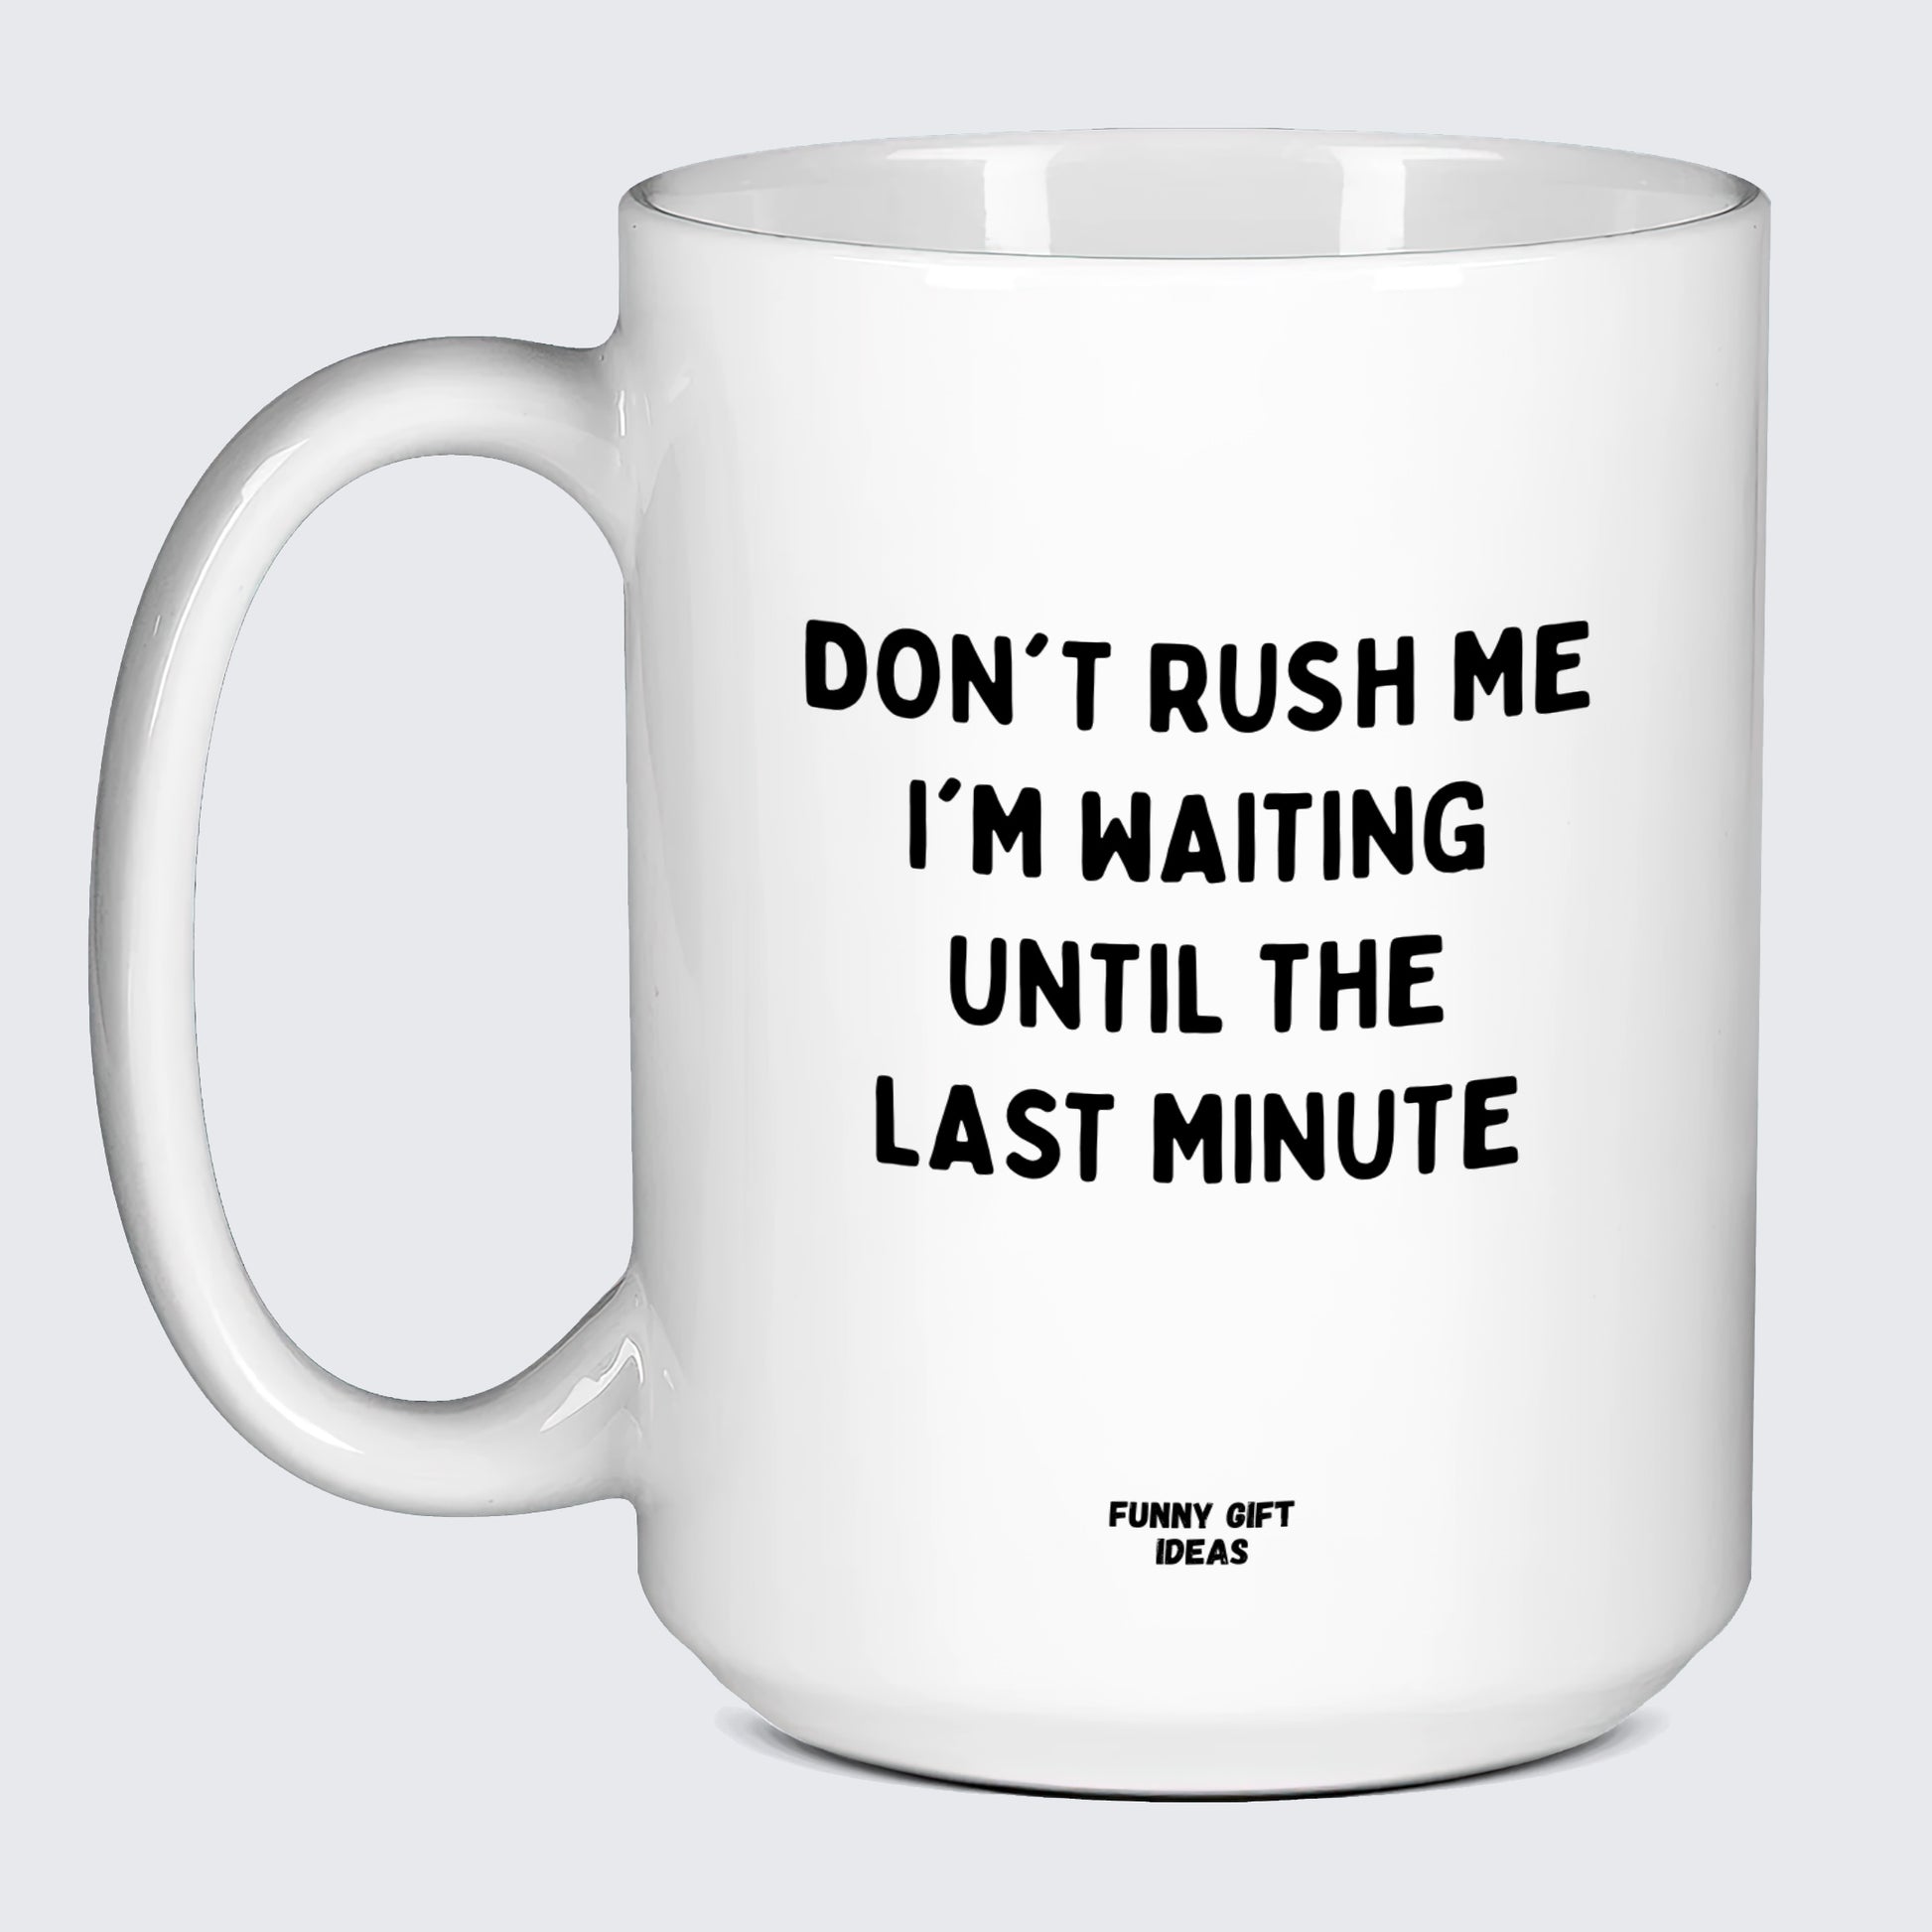 Cool Mugs Don't Rush Me I'm Waiting Until the Last Minute - Funny Gift Ideas